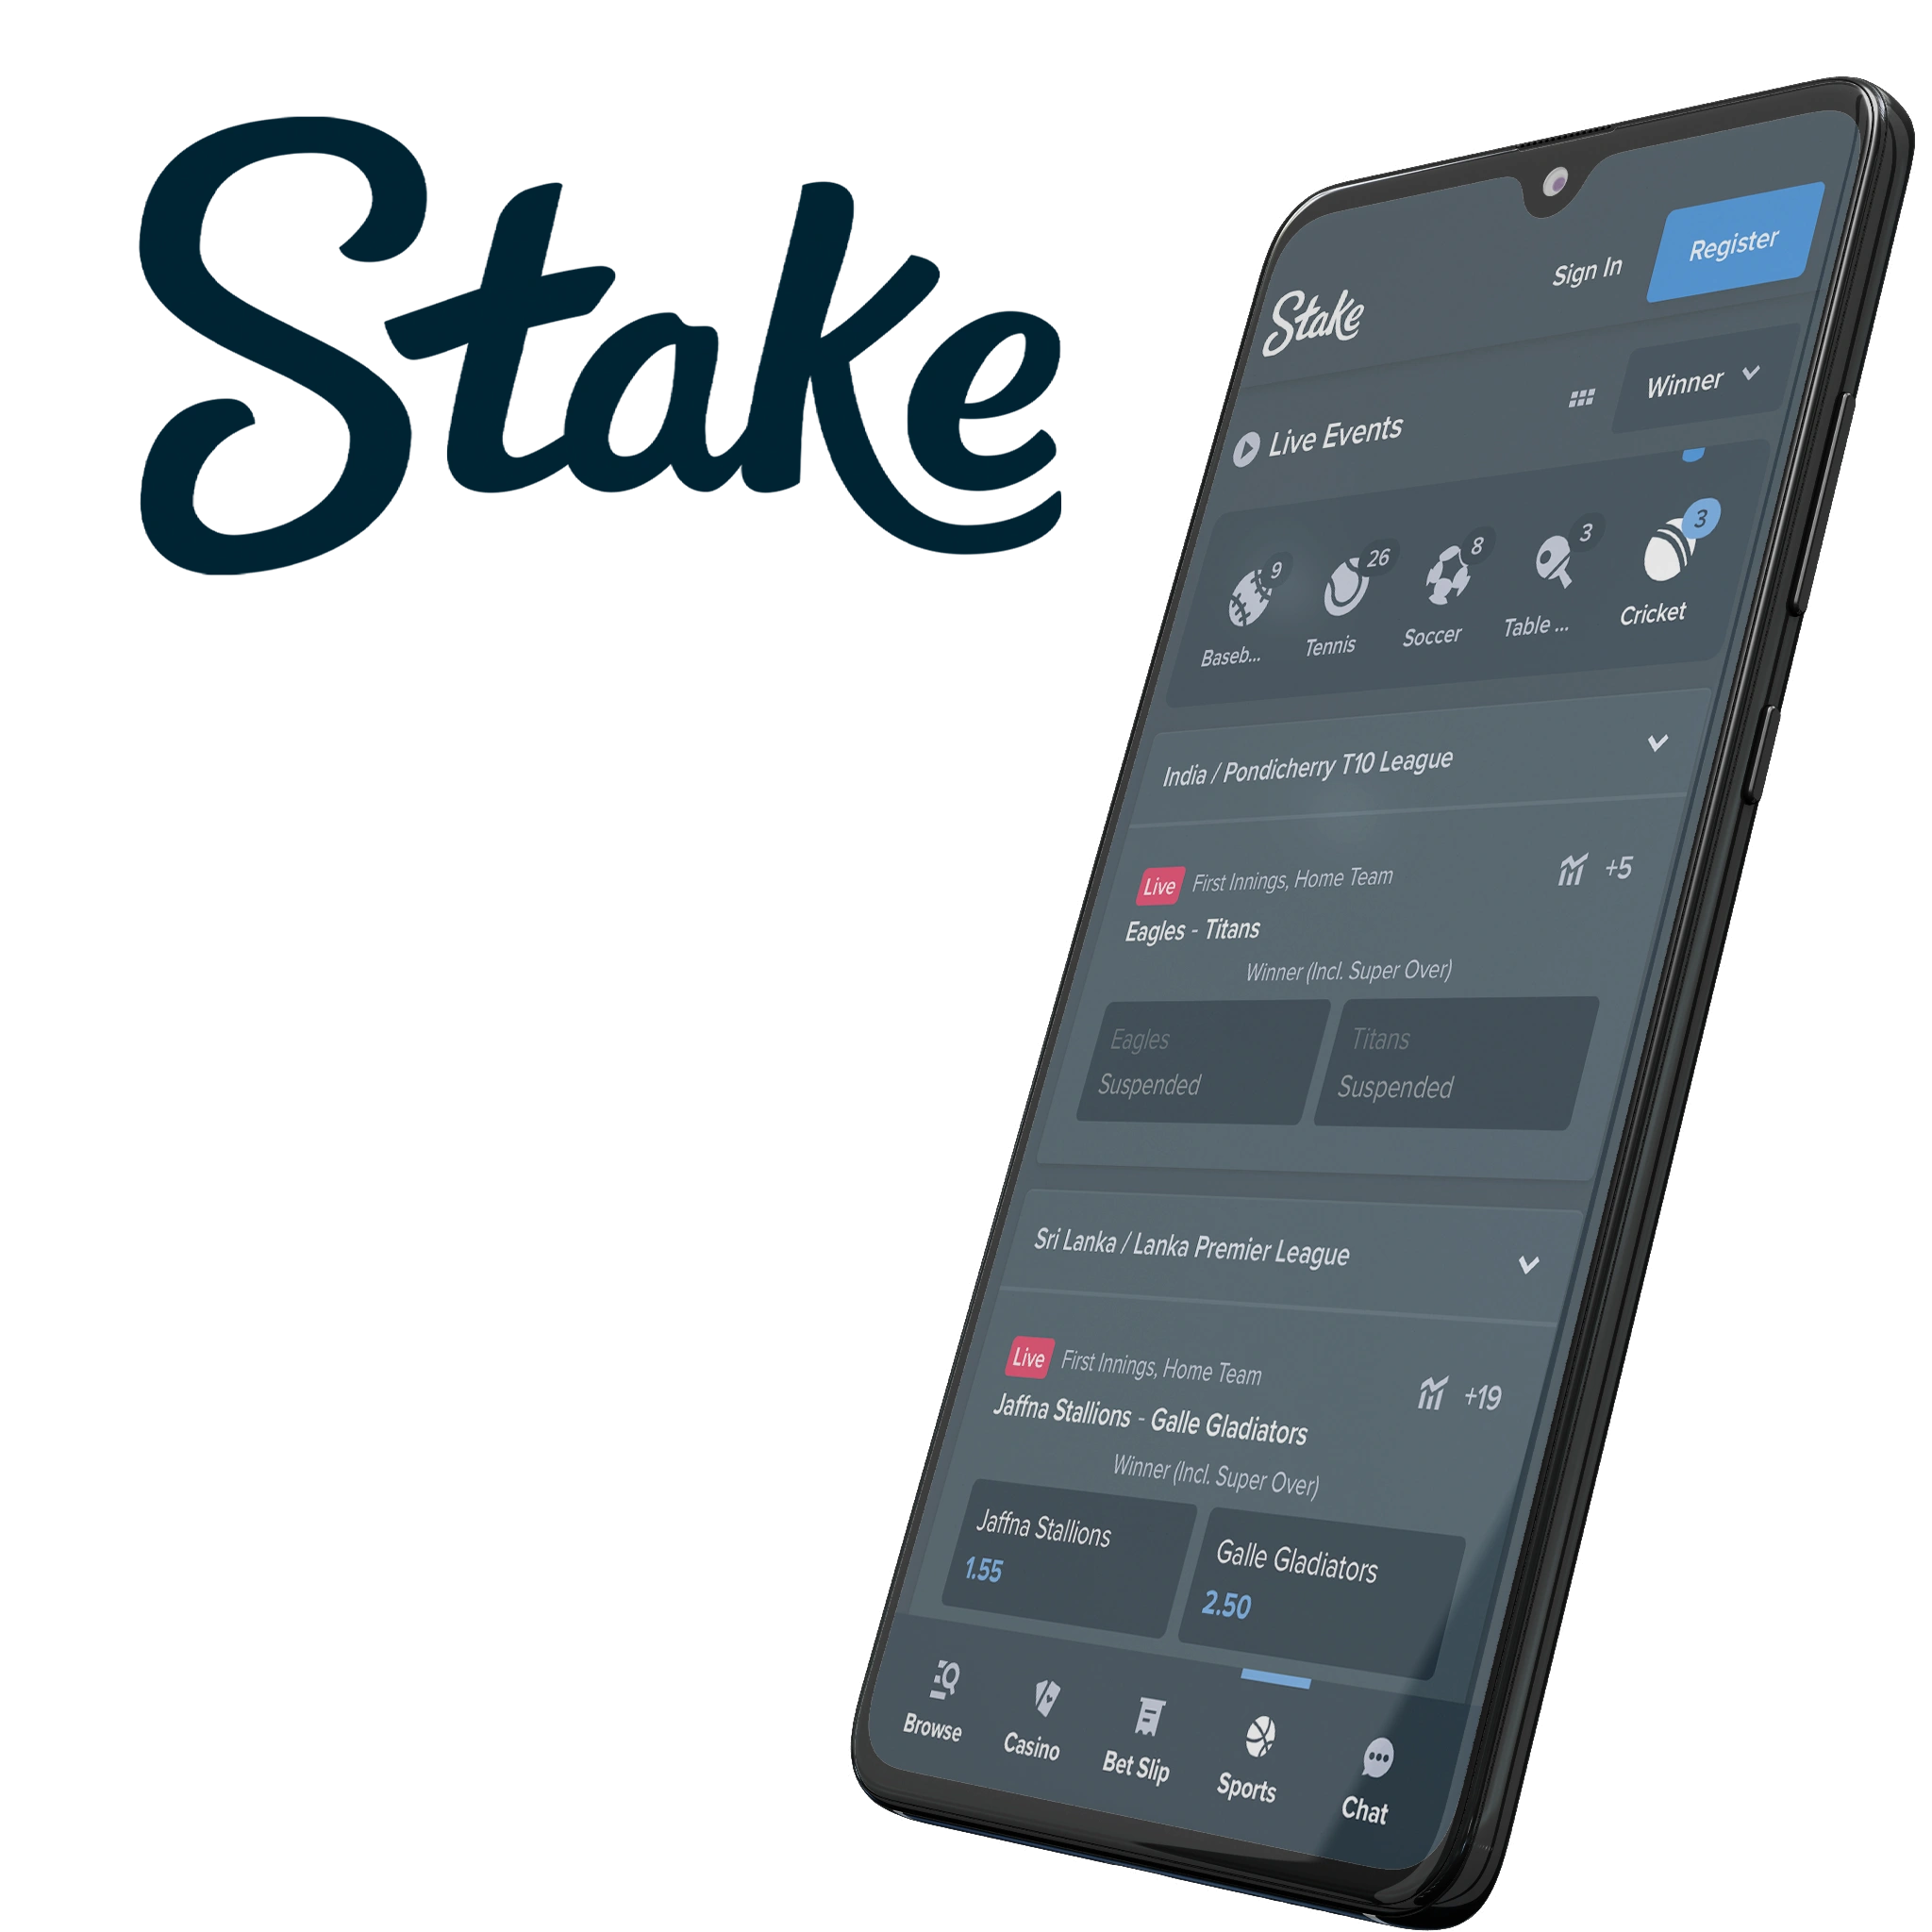 Stake App for those who care about earning real cash on live cricket betting.